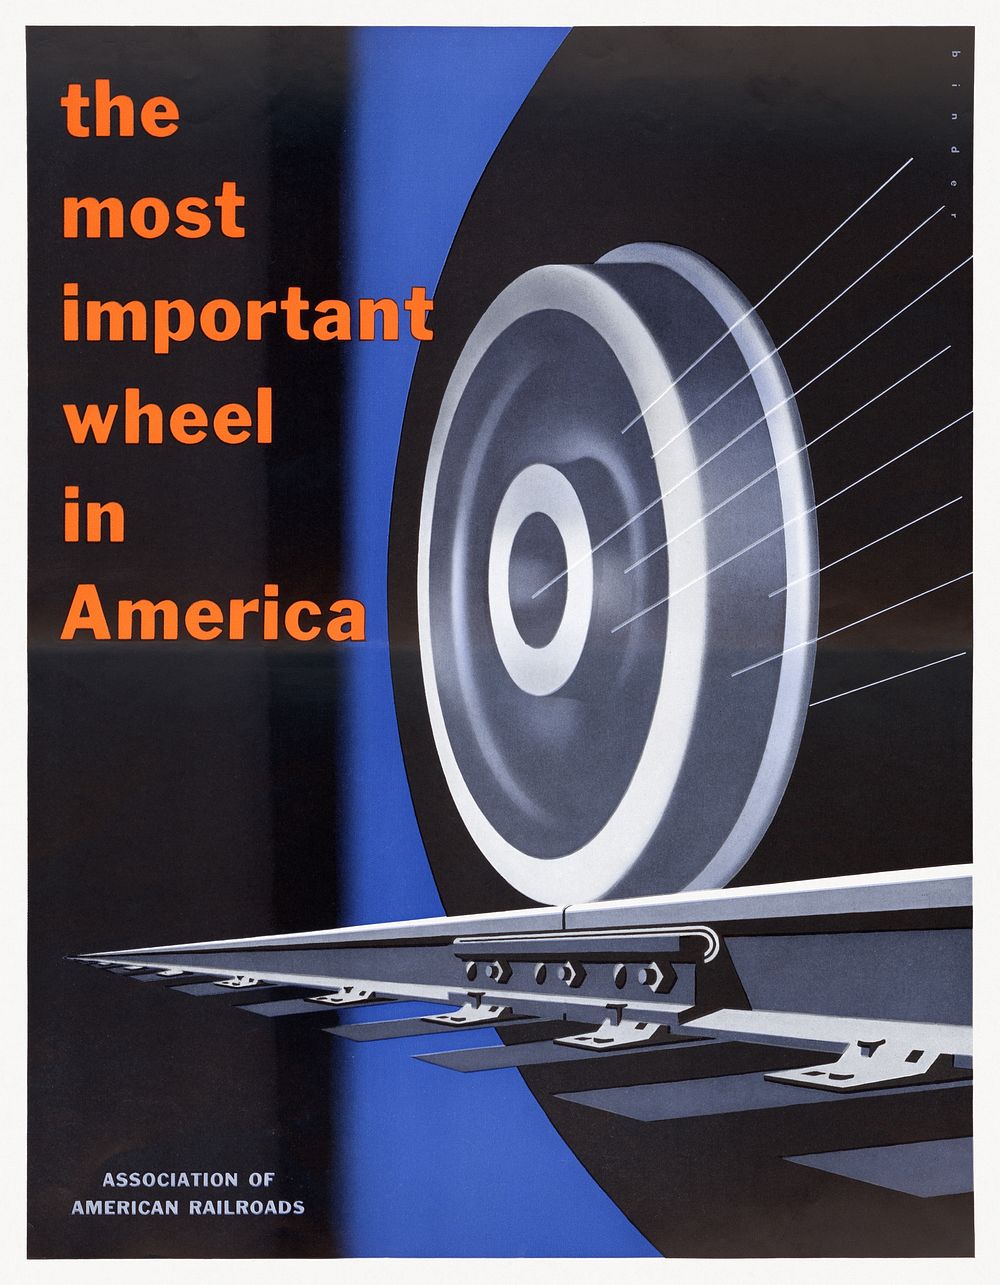 The most important wheels in America (1952) car poster by Joseph Binder. Original public domain image from the Library of…